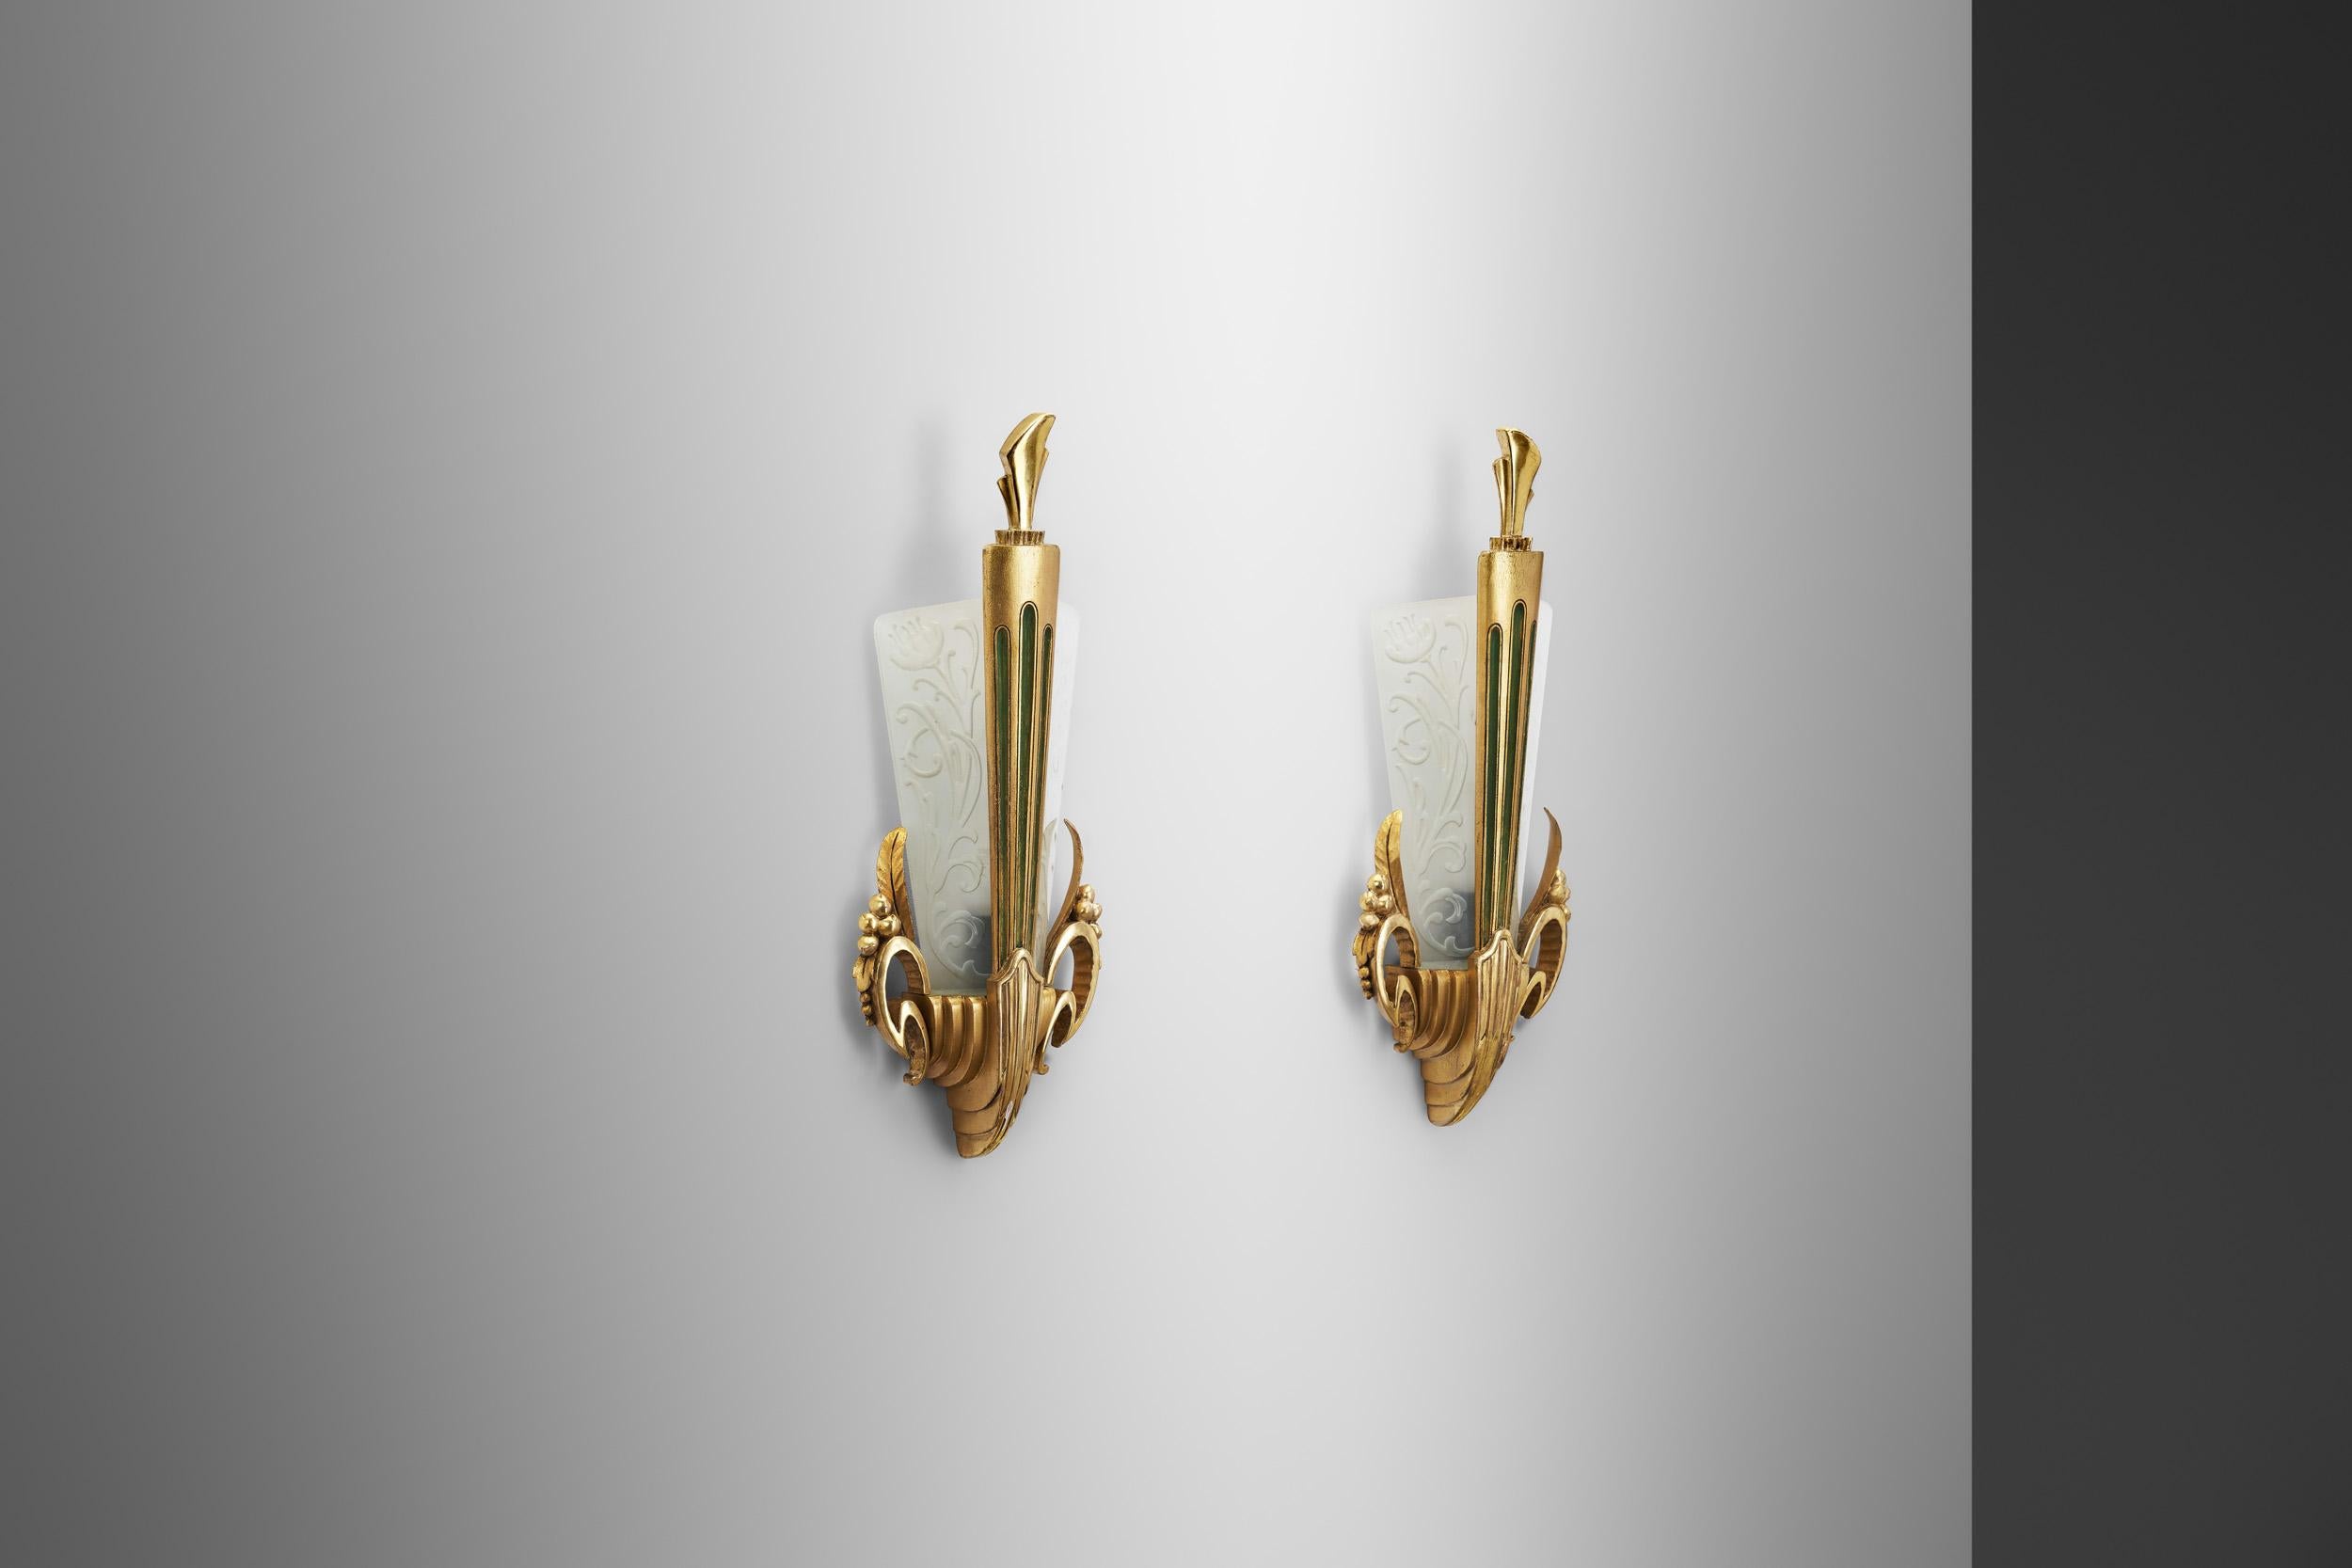 Art Nouveau Glass and Giltwood Wall Lights by Broman, Europe Early 20th Century For Sale